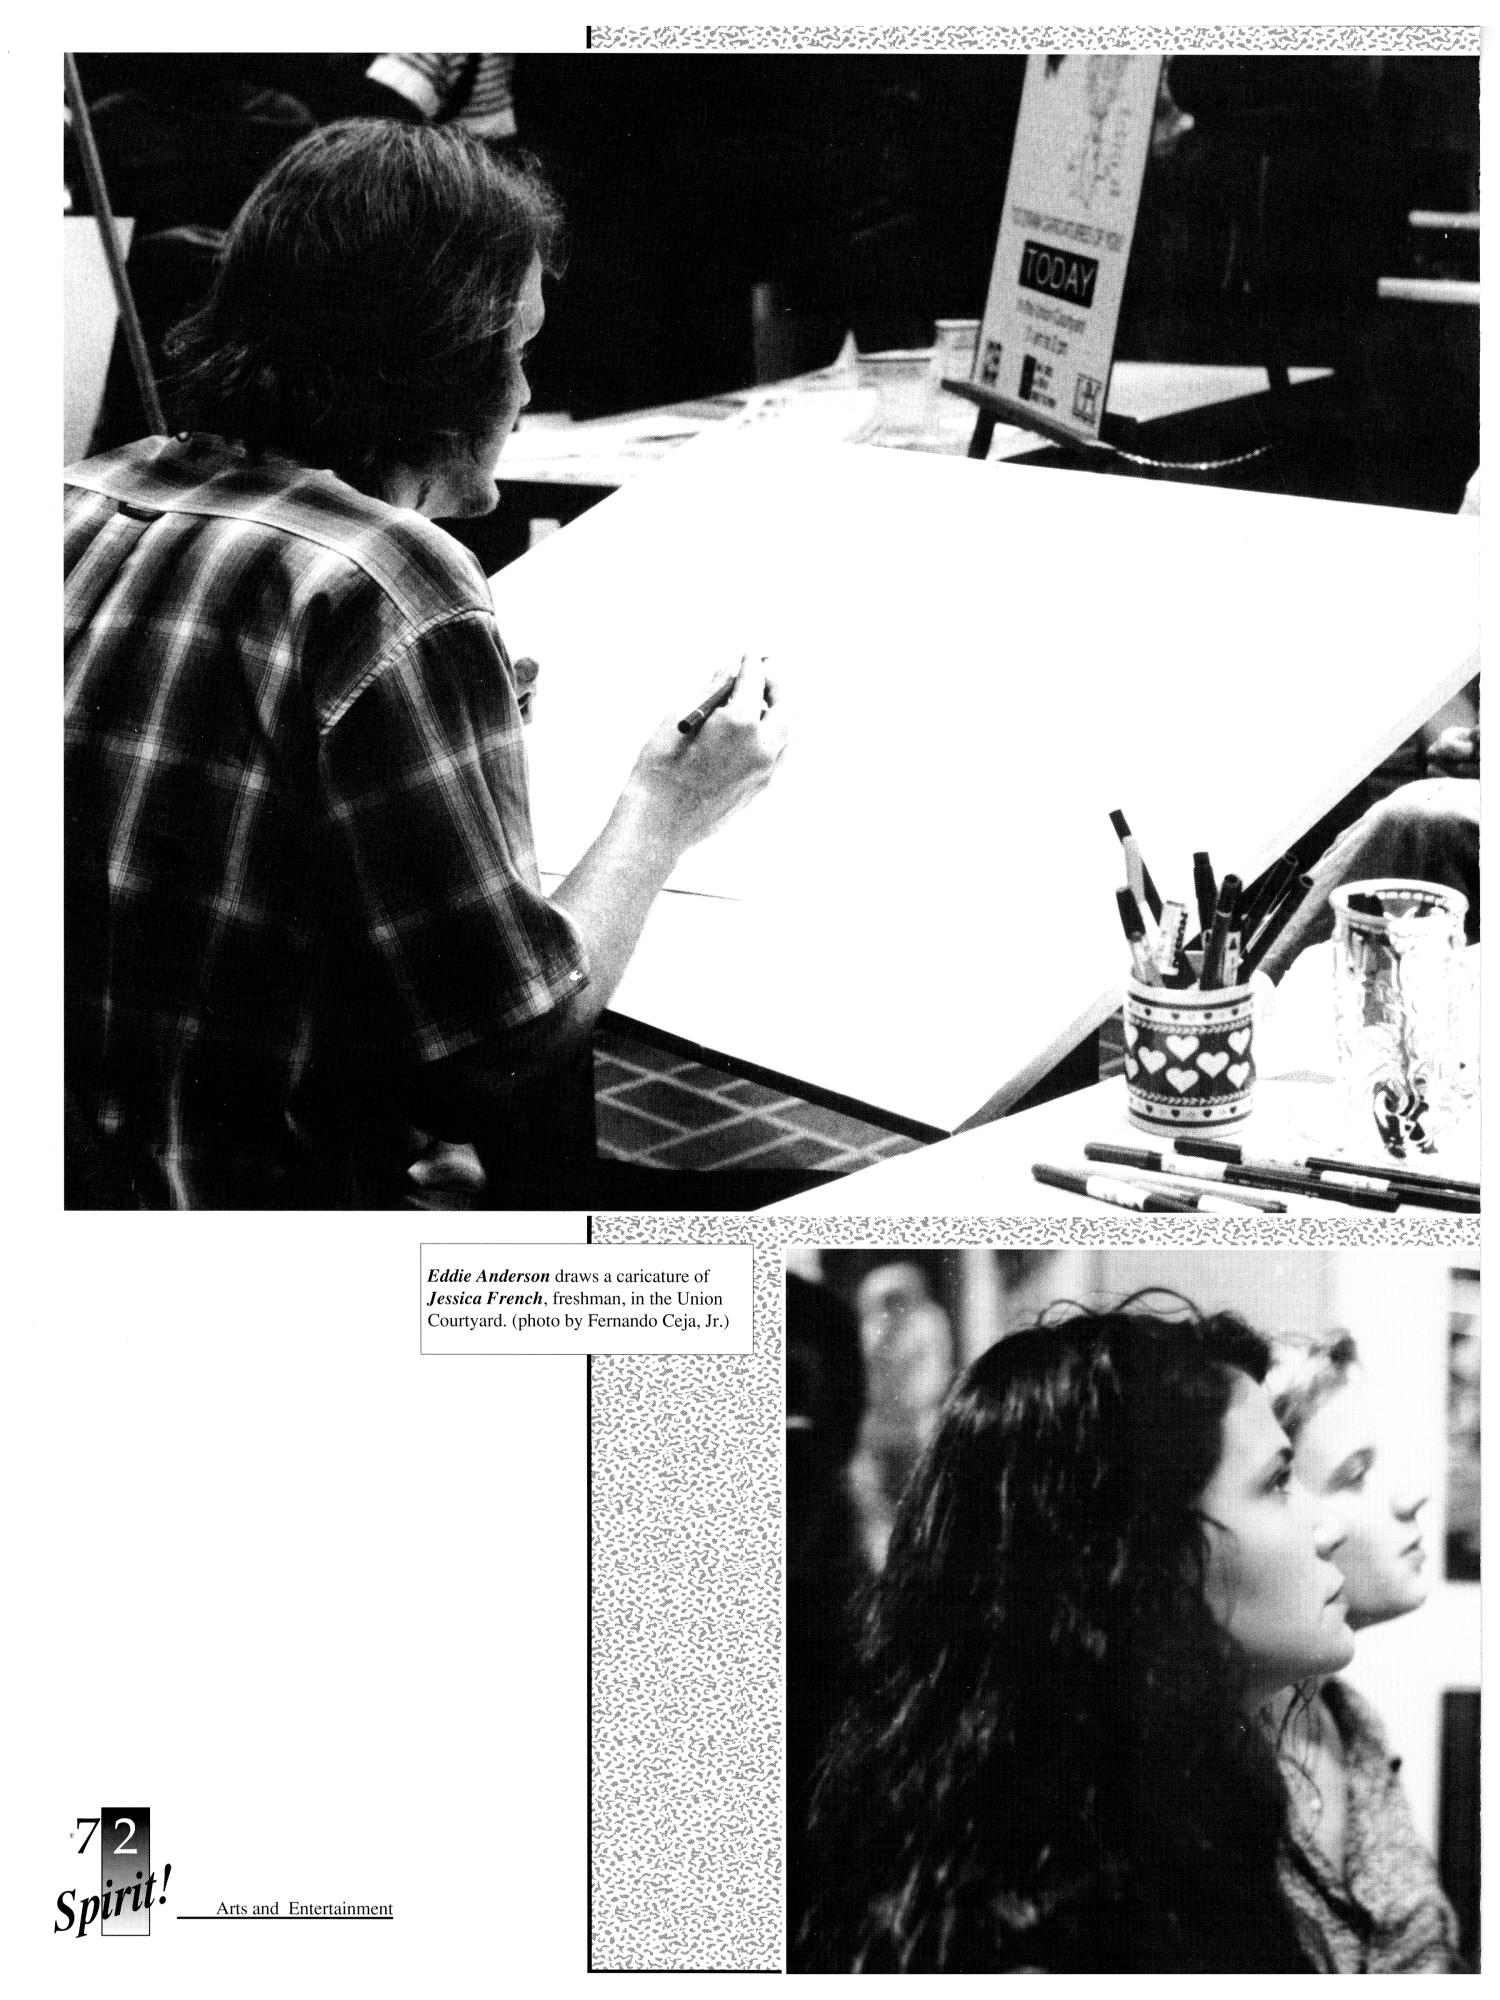 The Aerie, Yearbook of University of North Texas, 1994
                                                
                                                    [Sequence #]: 76 of 281
                                                